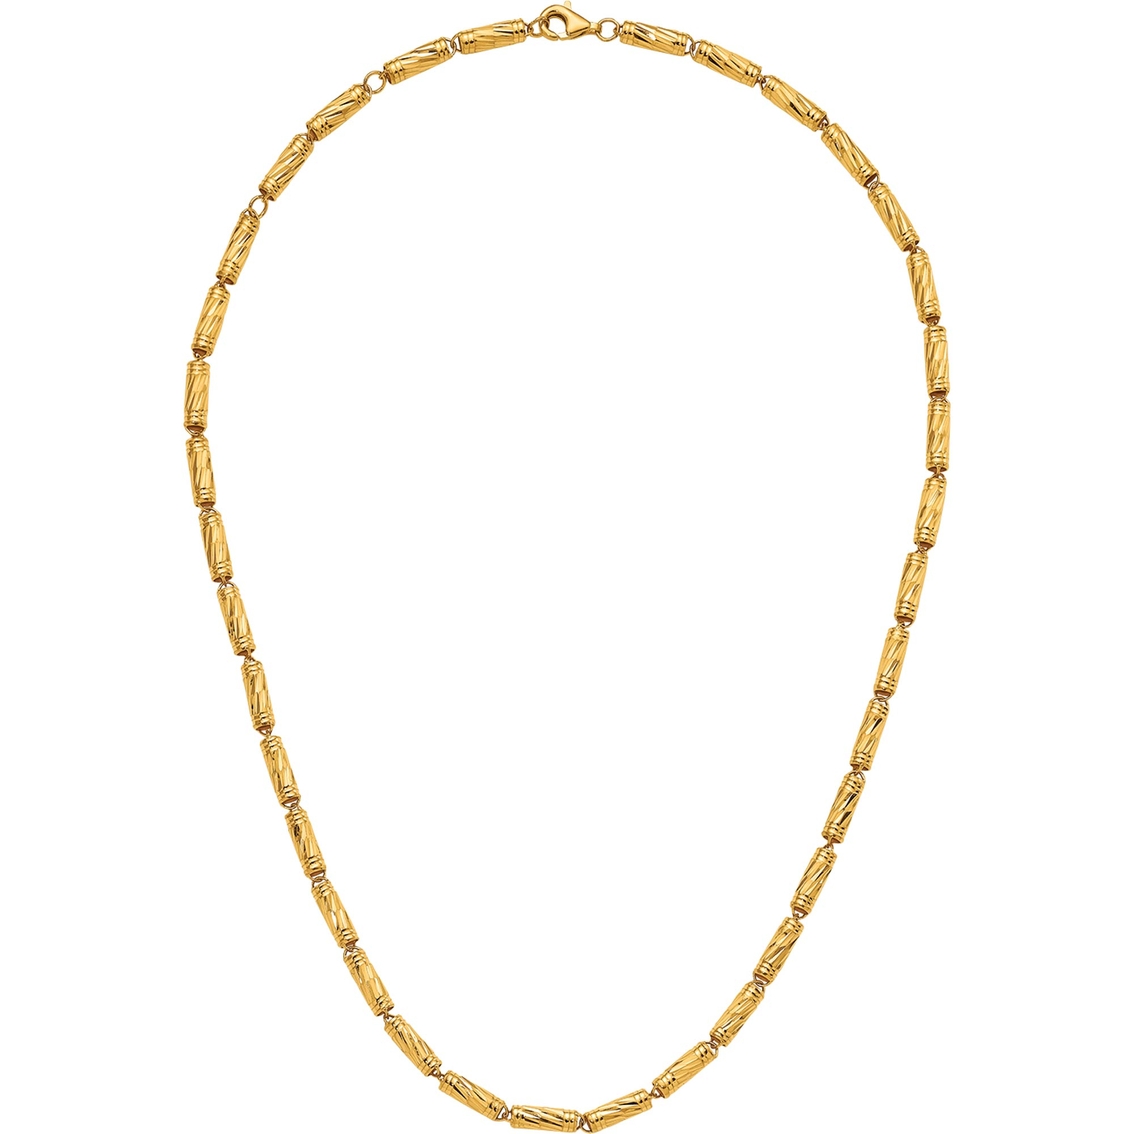 24K Pure Gold 18 in. Bamboo Link Chain Necklace - Image 2 of 6